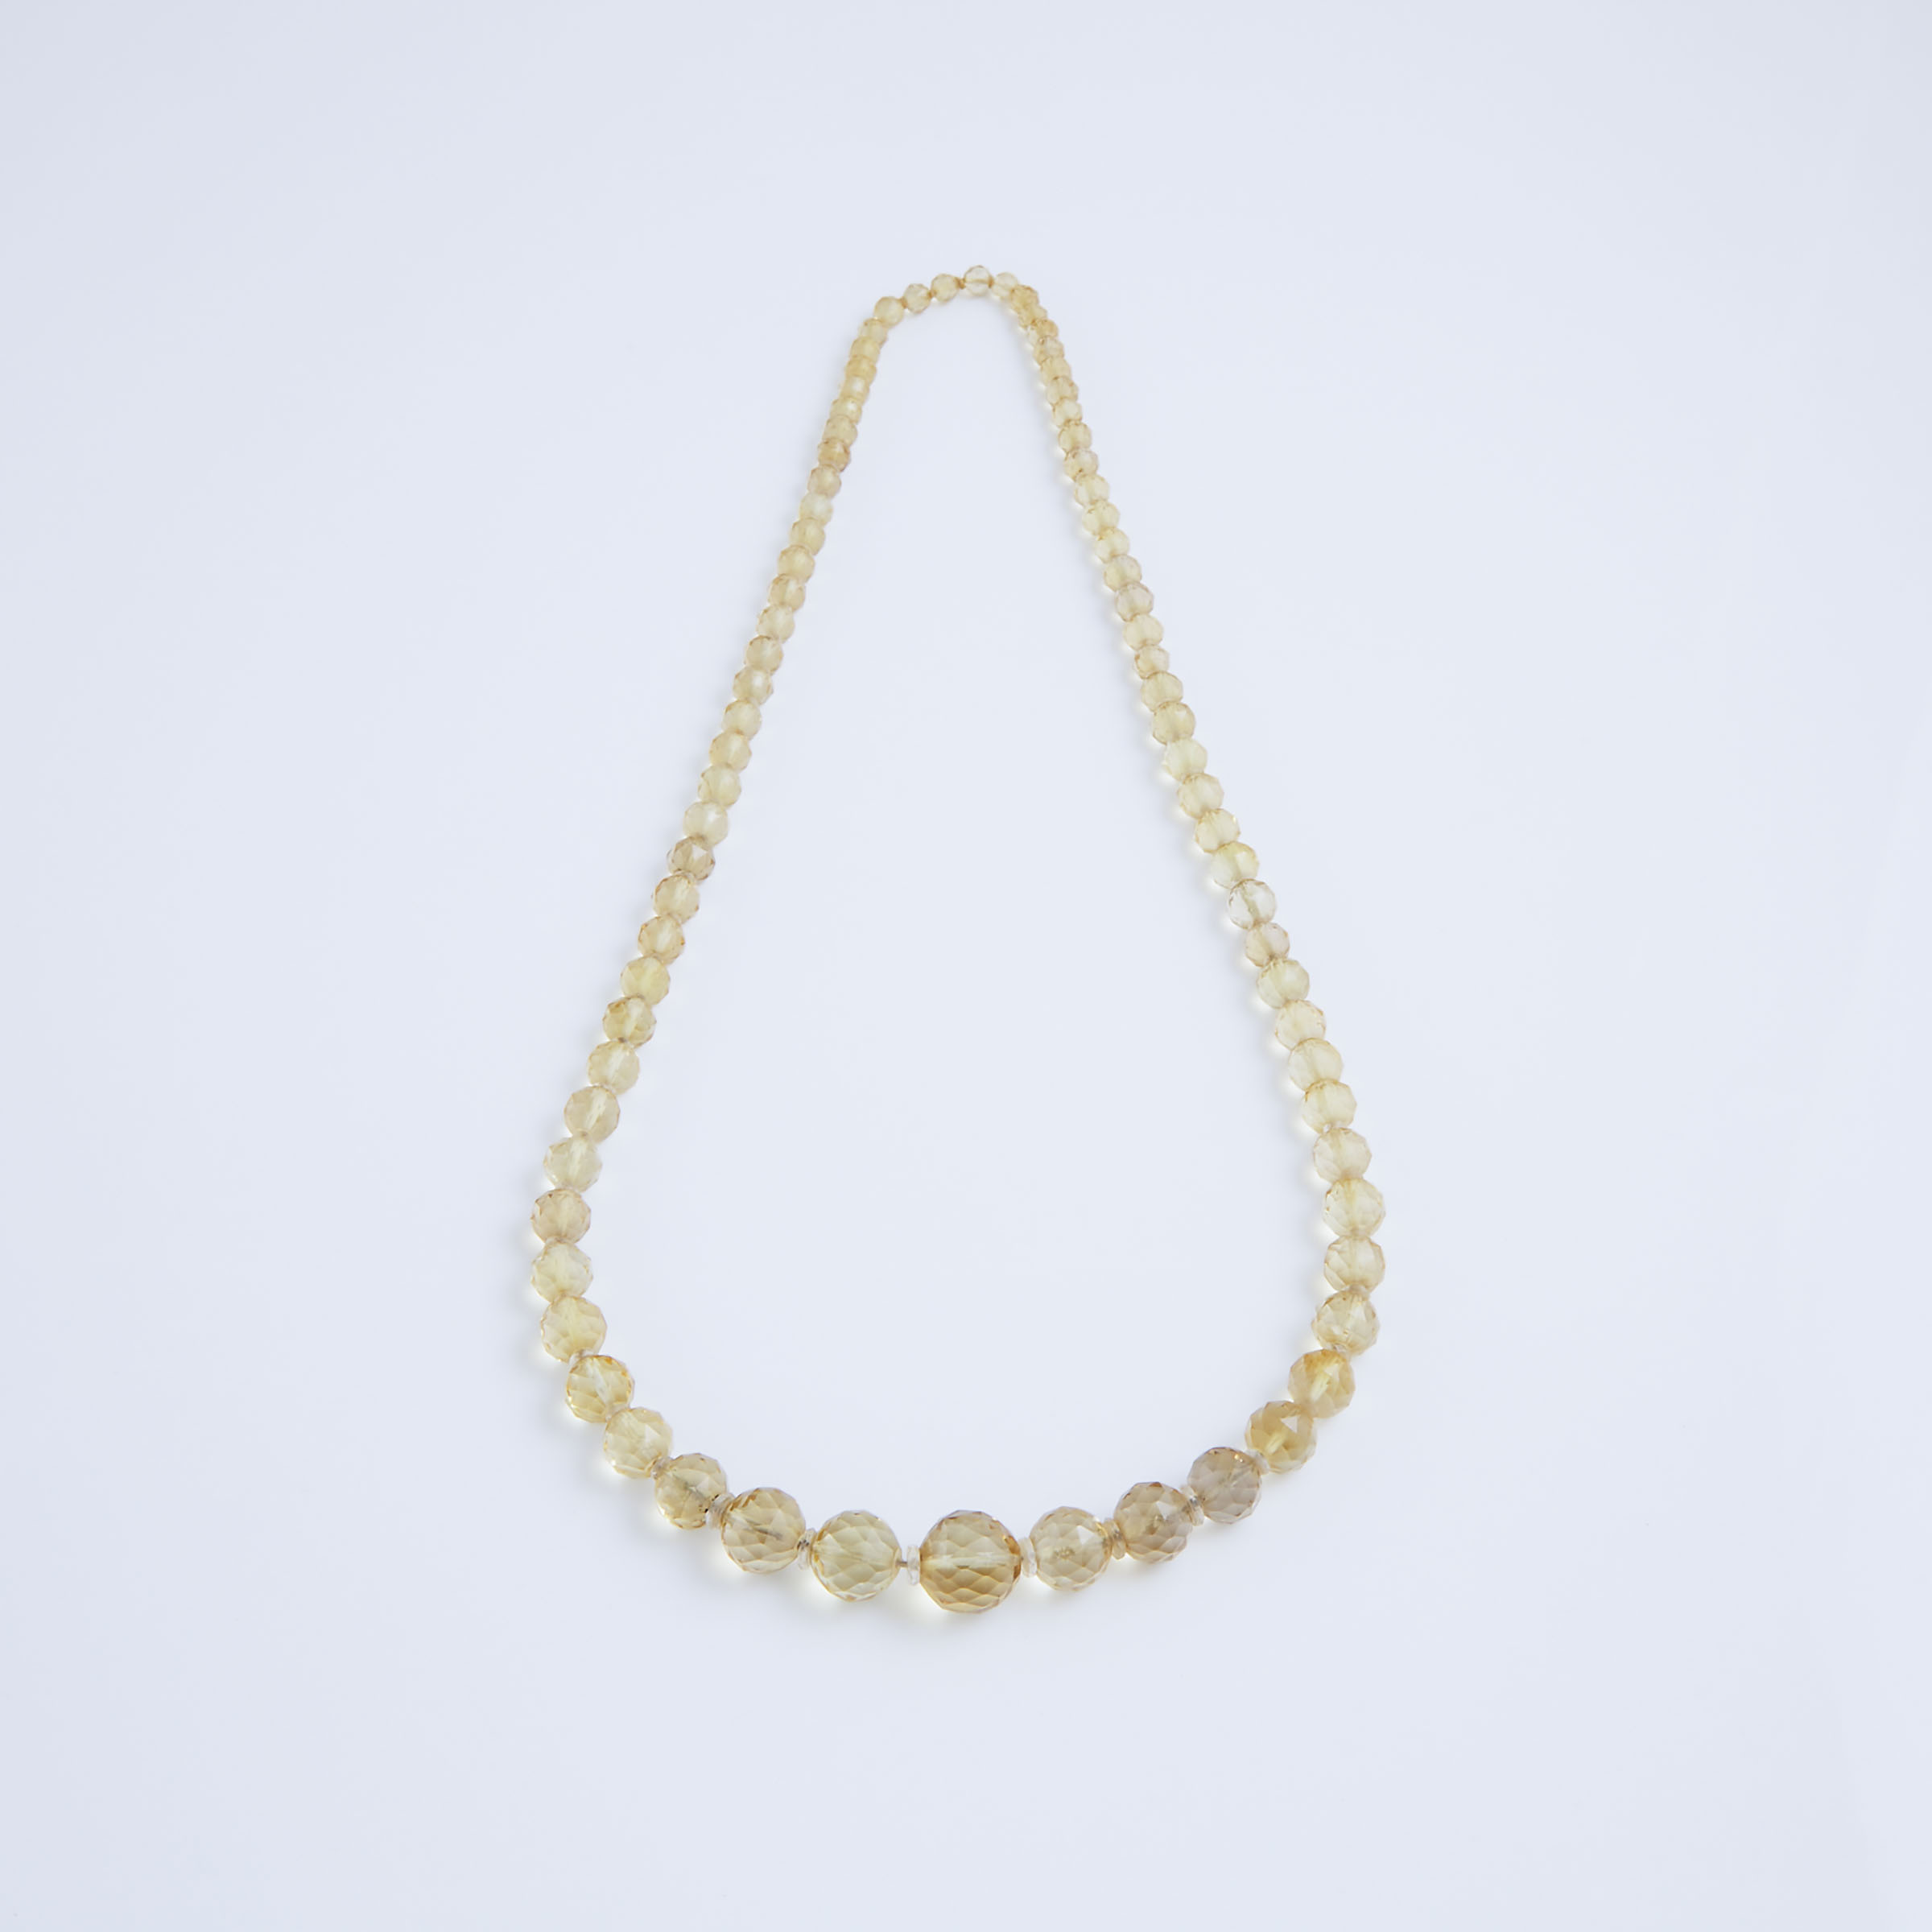 Graduated Faceted Citrine Bead Endless Necklace